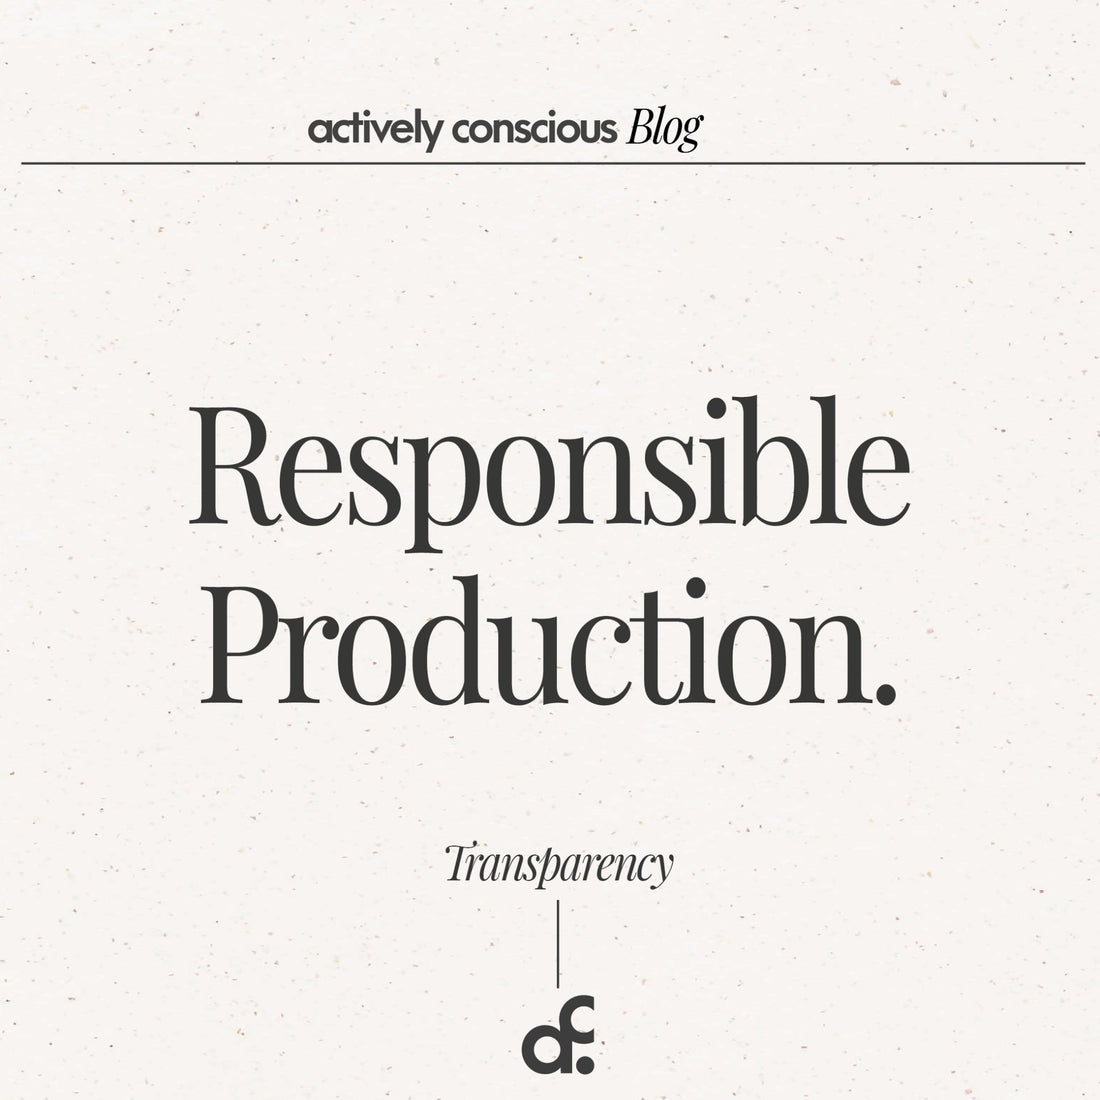 Responsible Production - Actively Conscious